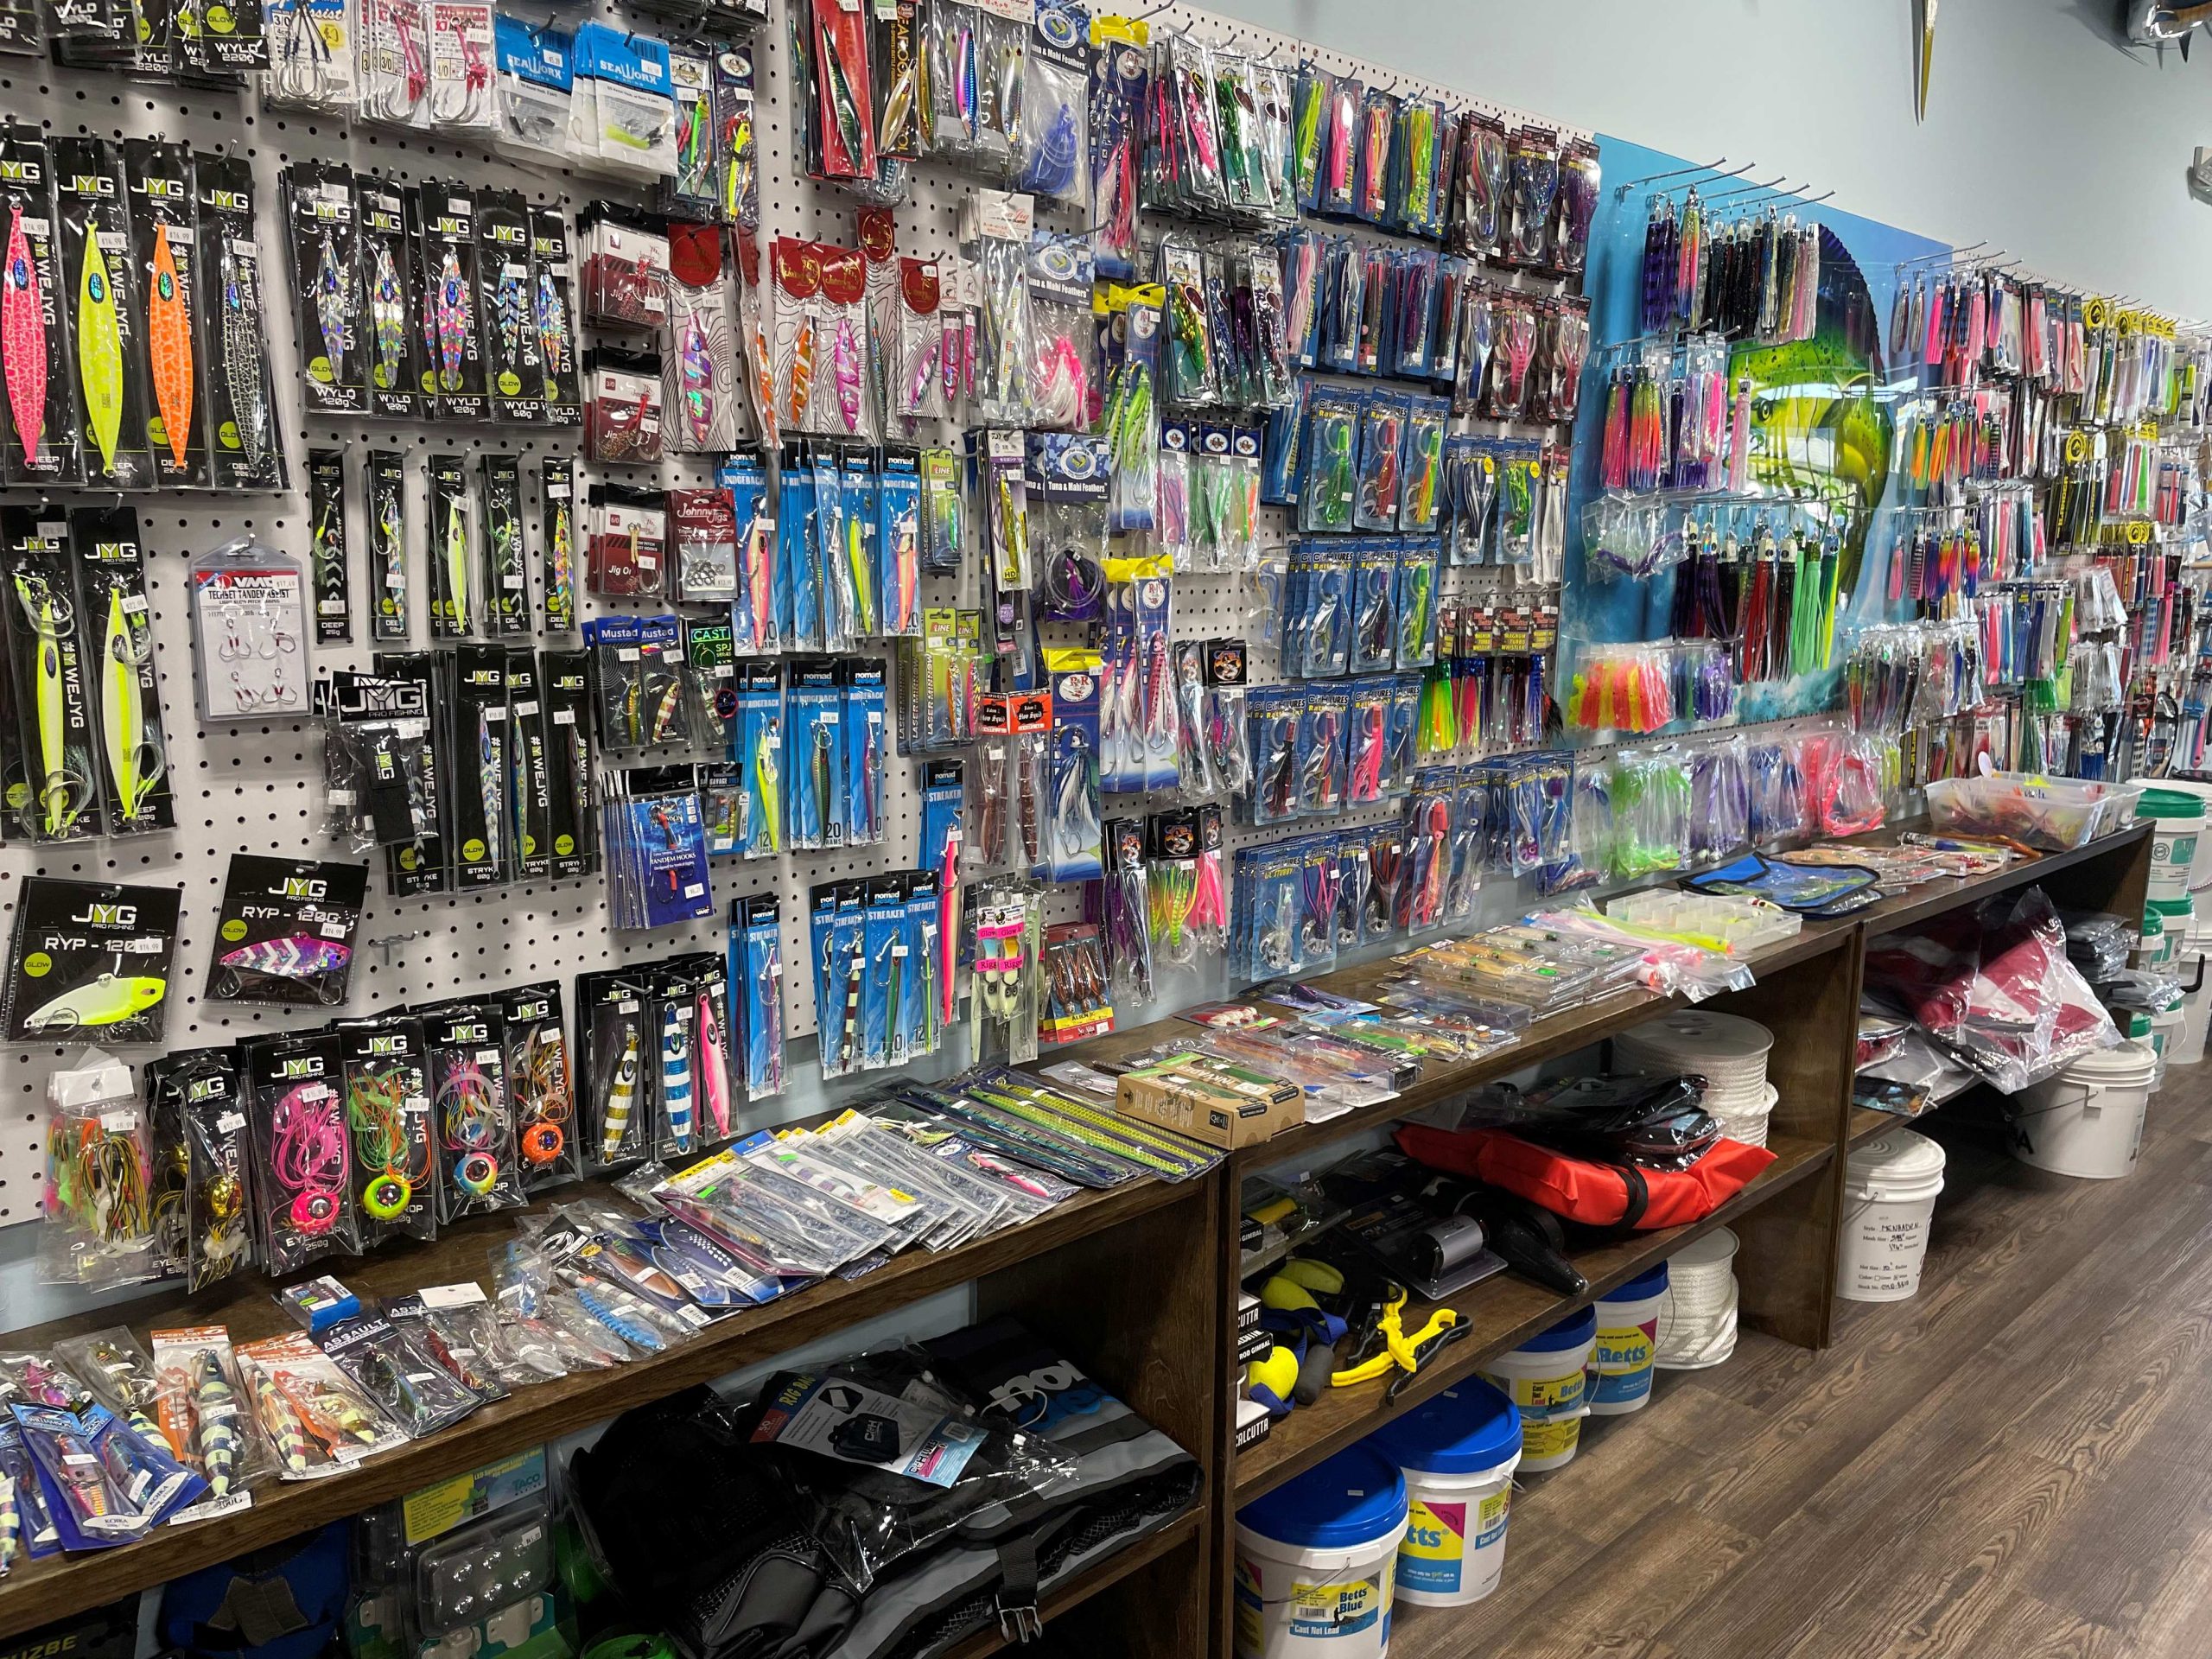 Shop of fishing supplies long wall of bait and tackle